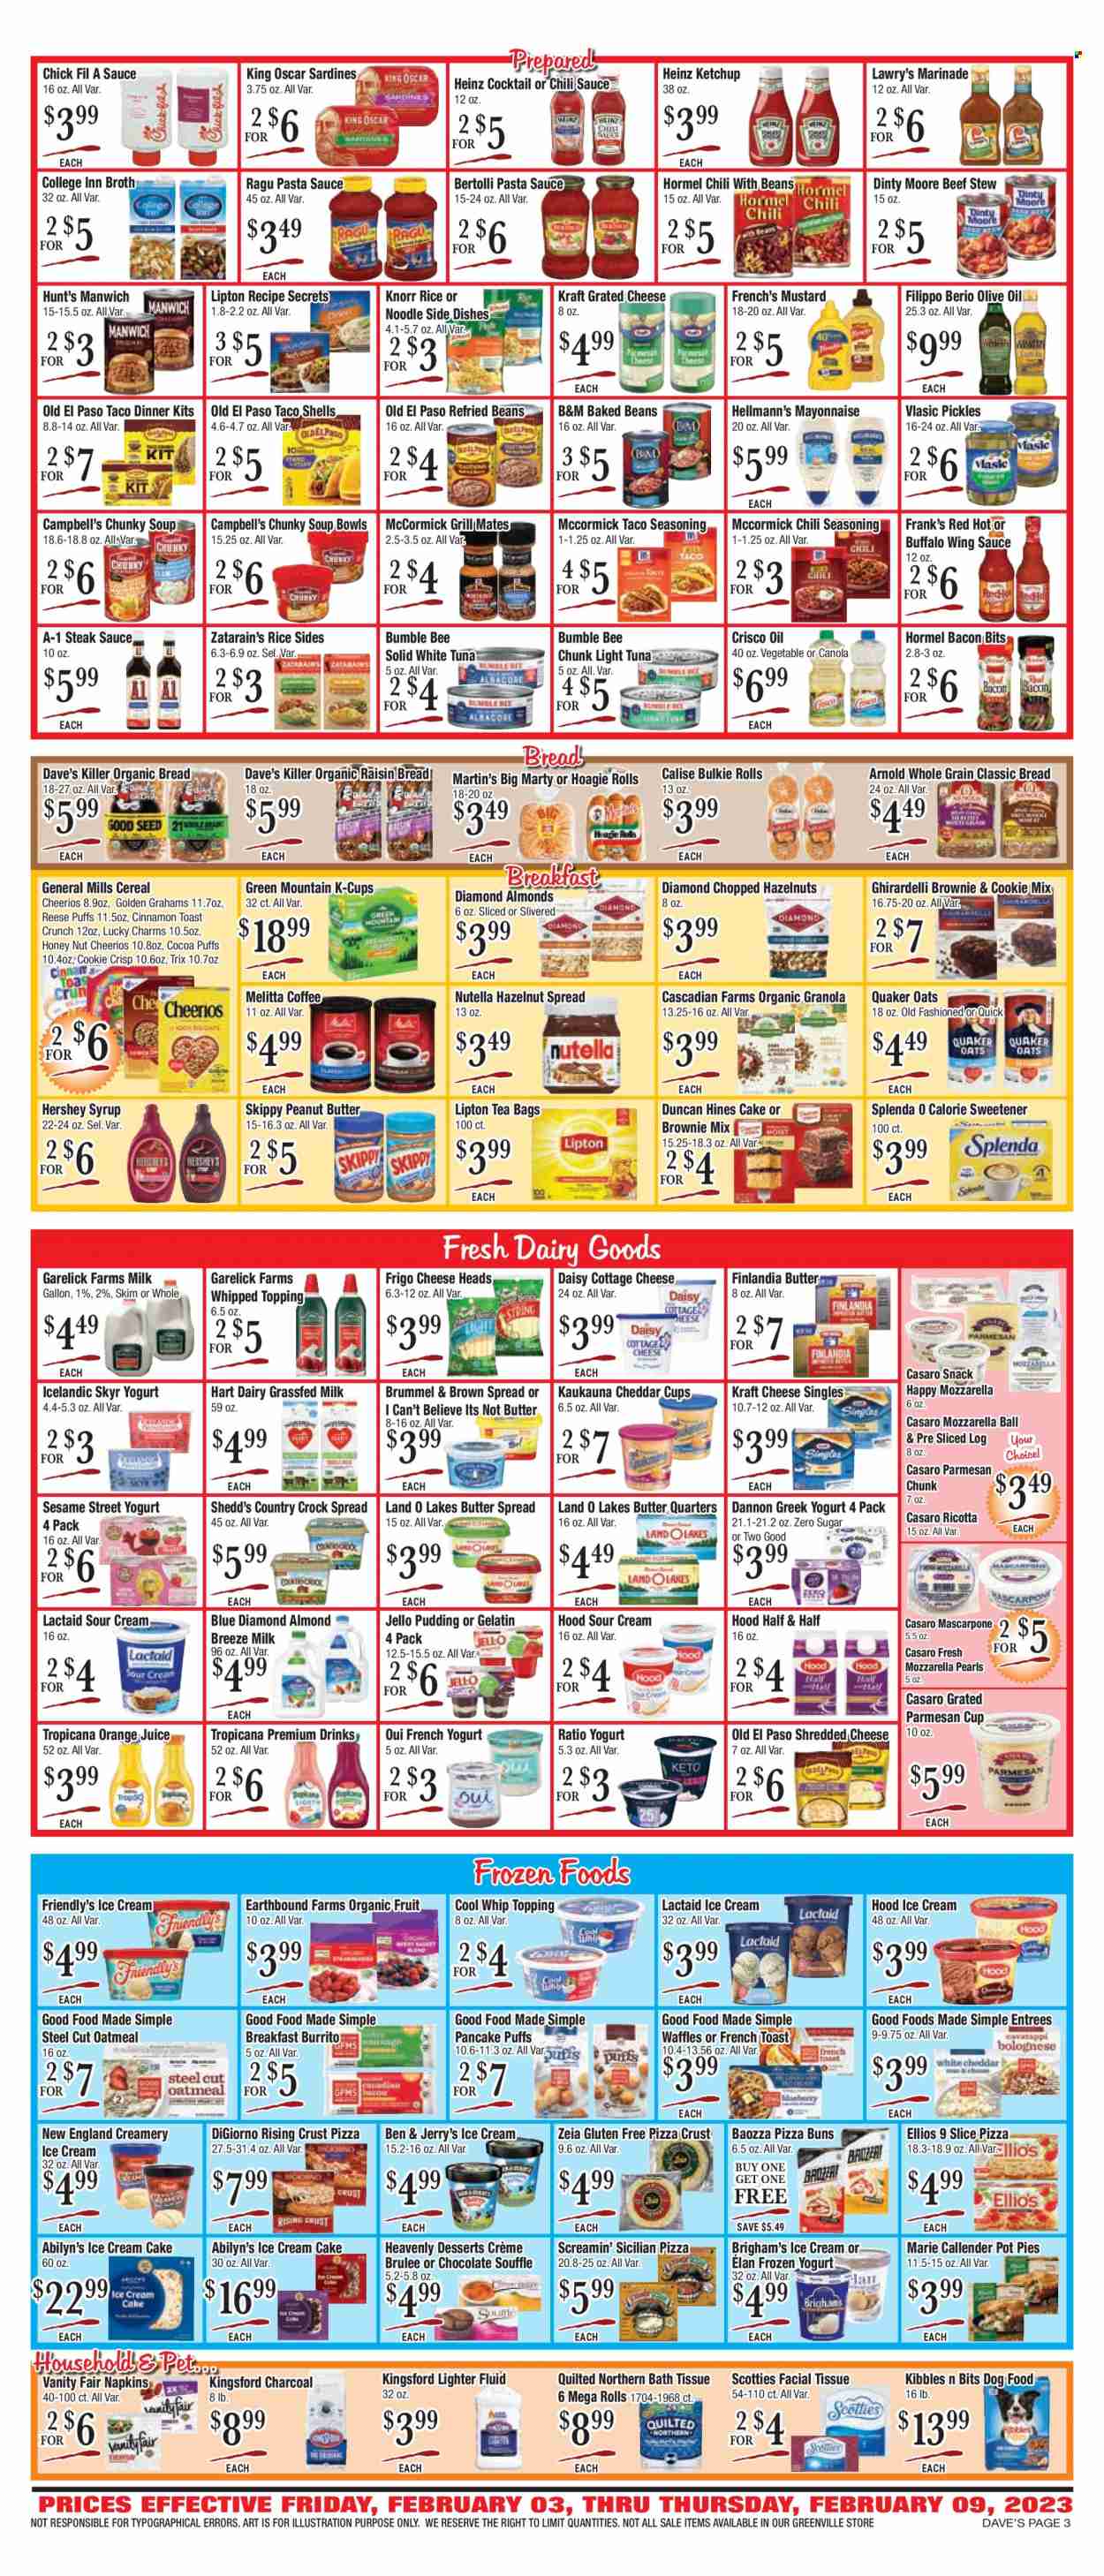 thumbnail - Dave's Fresh Marketplace Flyer - 02/03/2023 - 02/09/2023 - Sales products - bread, cake, buns, Old El Paso, pot pie, puffs, waffles, brownie mix, sardines, Campbell's, pizza, pasta sauce, soup, Bumble Bee, Knorr, sauce, pancakes, dinner kit, burrito, Quaker, noodles, Kraft®, Bertolli, Hormel, Kingsford, ragú pasta, bacon bits, cottage cheese, Lactaid, mascarpone, ricotta, shredded cheese, cheddar, parmesan, grated cheese, greek yoghurt, pudding, yoghurt, Dannon, milk, Almond Breeze, Cool Whip, sour cream, mayonnaise, Hellmann’s, ice cream, Ben & Jerry's, Friendly's Ice Cream, Screamin' Sicilian, Nutella, snack, Ghirardelli, Sesame Street, Crisco, oatmeal, oats, topping, Jell-O, broth, sweetener, refried beans, Heinz, pickles, light tuna, baked beans, Manwich, cereals, granola, Cheerios, Trix, spice, cinnamon, mustard, steak sauce, ketchup, chilli sauce, marinade, wing sauce, ragu, olive oil, oil, peanut butter, syrup, hazelnut spread, hazelnuts, Blue Diamond, orange juice, juice, Lipton, tea bags, coffee, coffee capsules, K-Cups, Green Mountain, steak, animal food, dog food, gelatin, Half and half. Page 3.